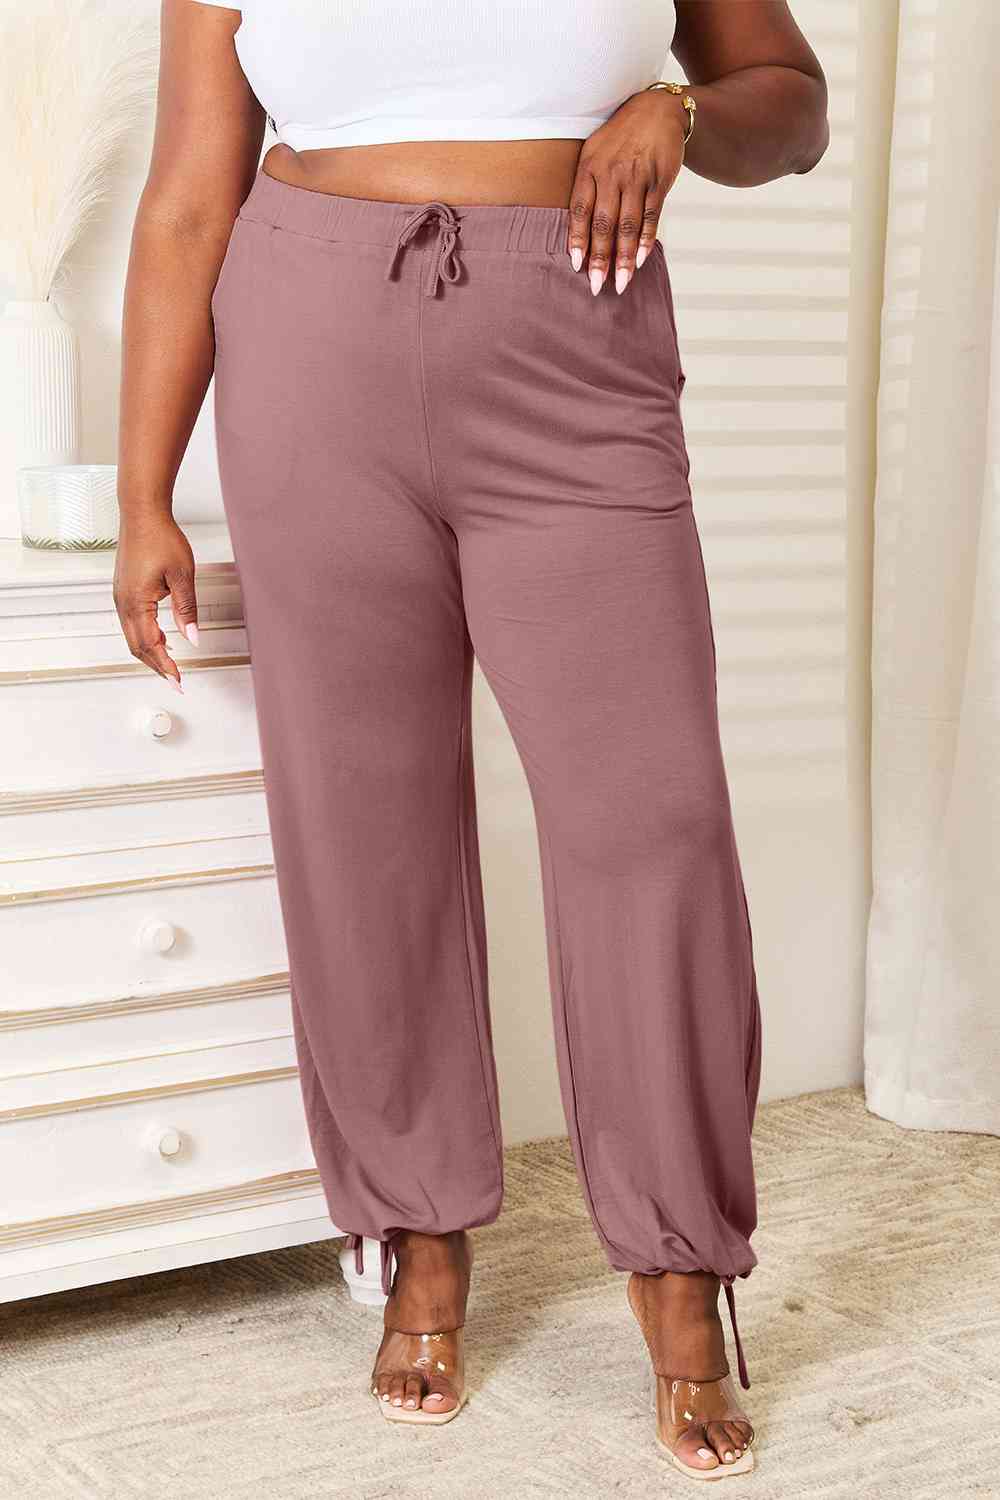 Basic Bae Full Size Soft Rayon Drawstring Waist Pants with Pockets - Crazy Like a Daisy Boutique #